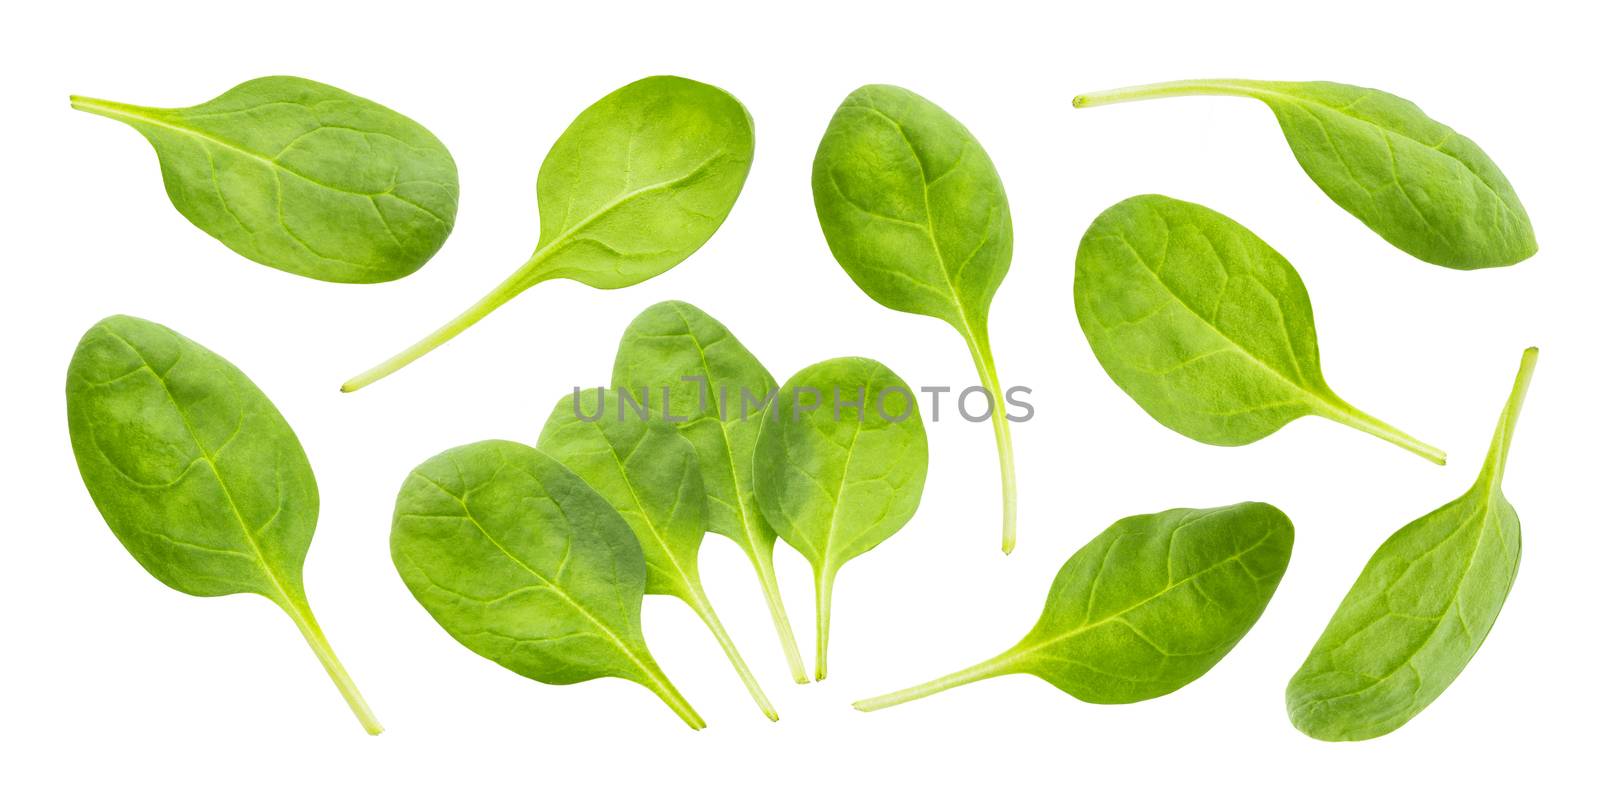 Spinach leaves isolated on white background with clipping path, collection by xamtiw